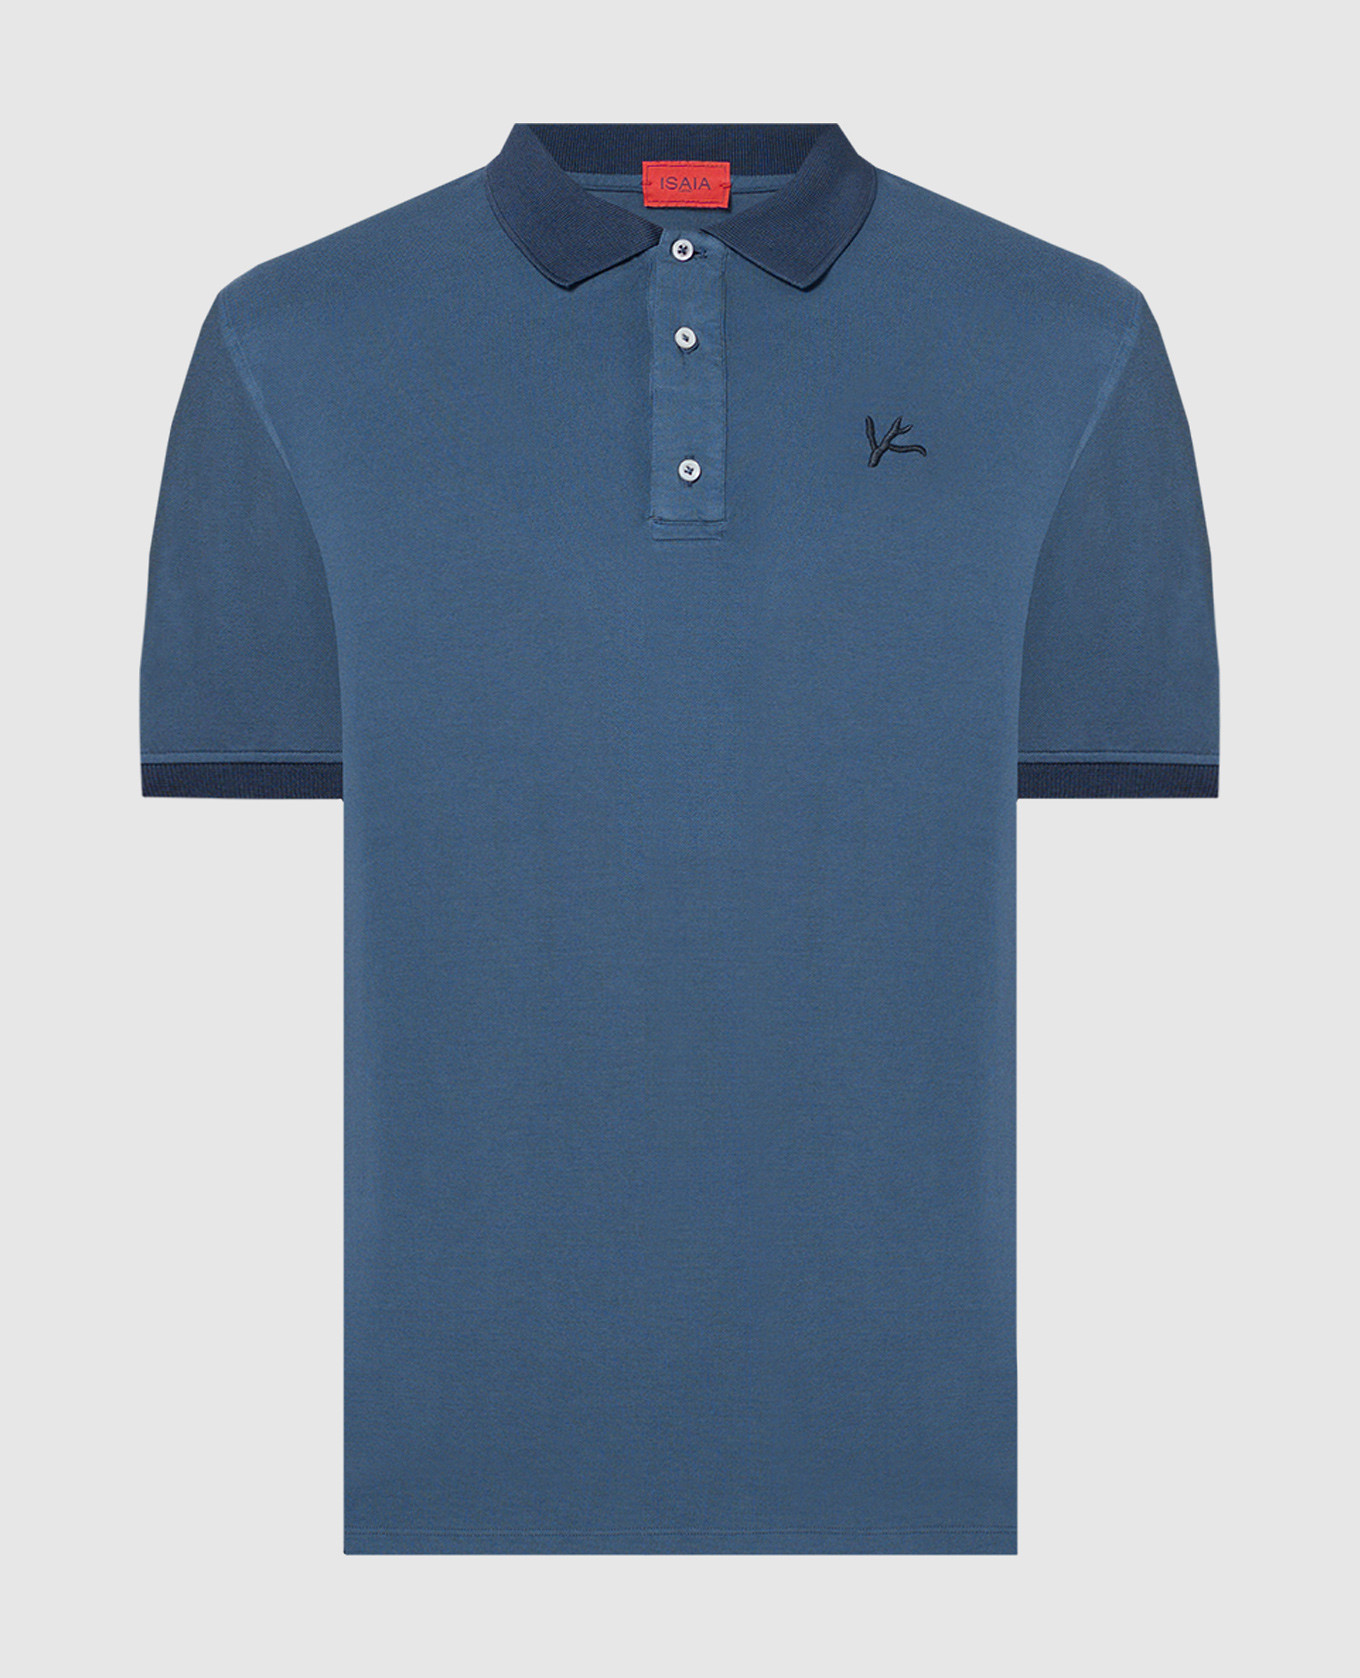 Blue polo with logo emblem embroidery